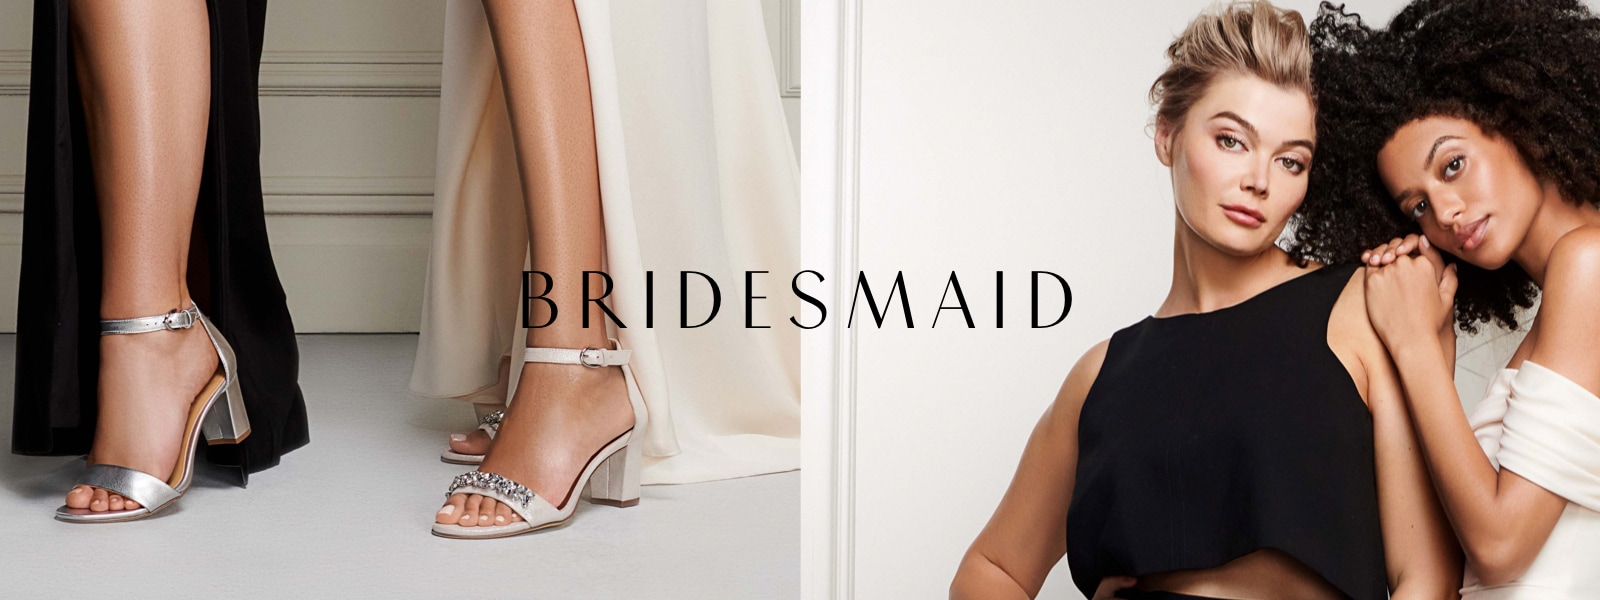 bridesmaids shoes by naturalizer